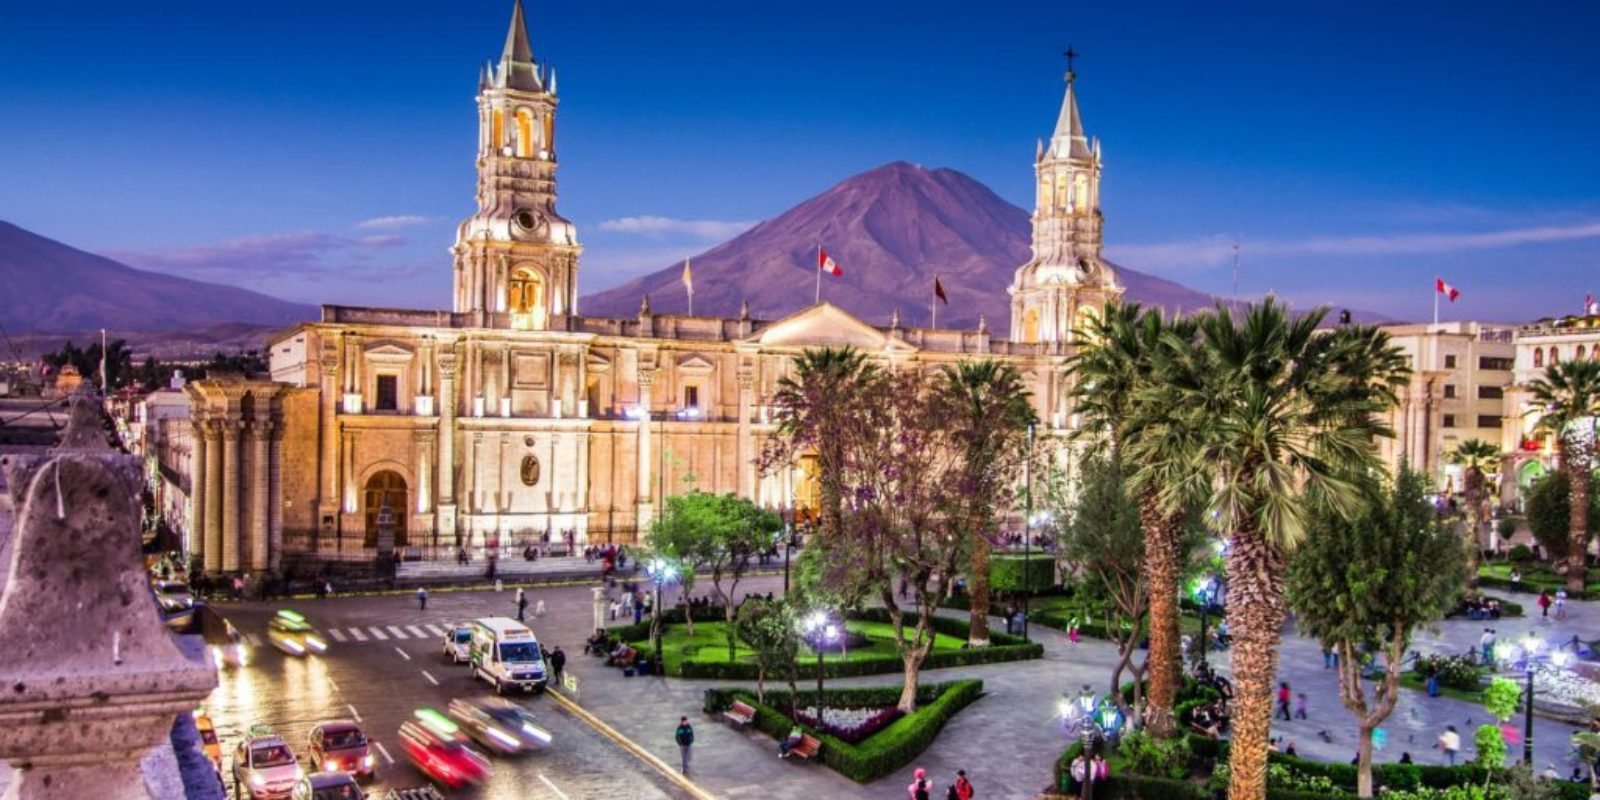 Peru's second-largest city, Arequipa, is a popular outdoor adventure destination. Go for kayaking and white water rafting alongside mountain horseback ...